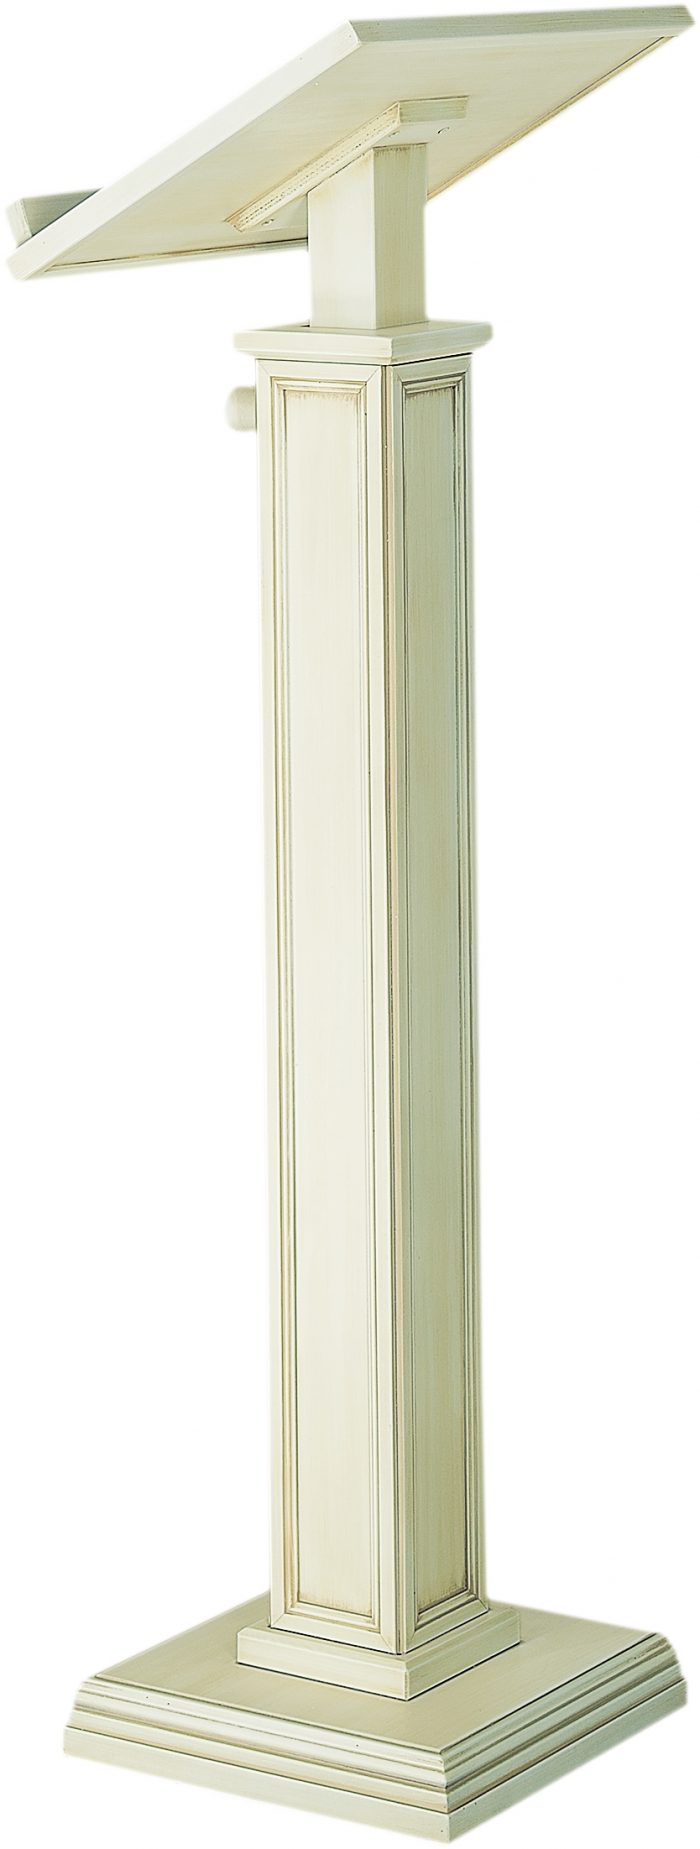 Solid wood white stem lectern with square section base and stem, decorated with moldings